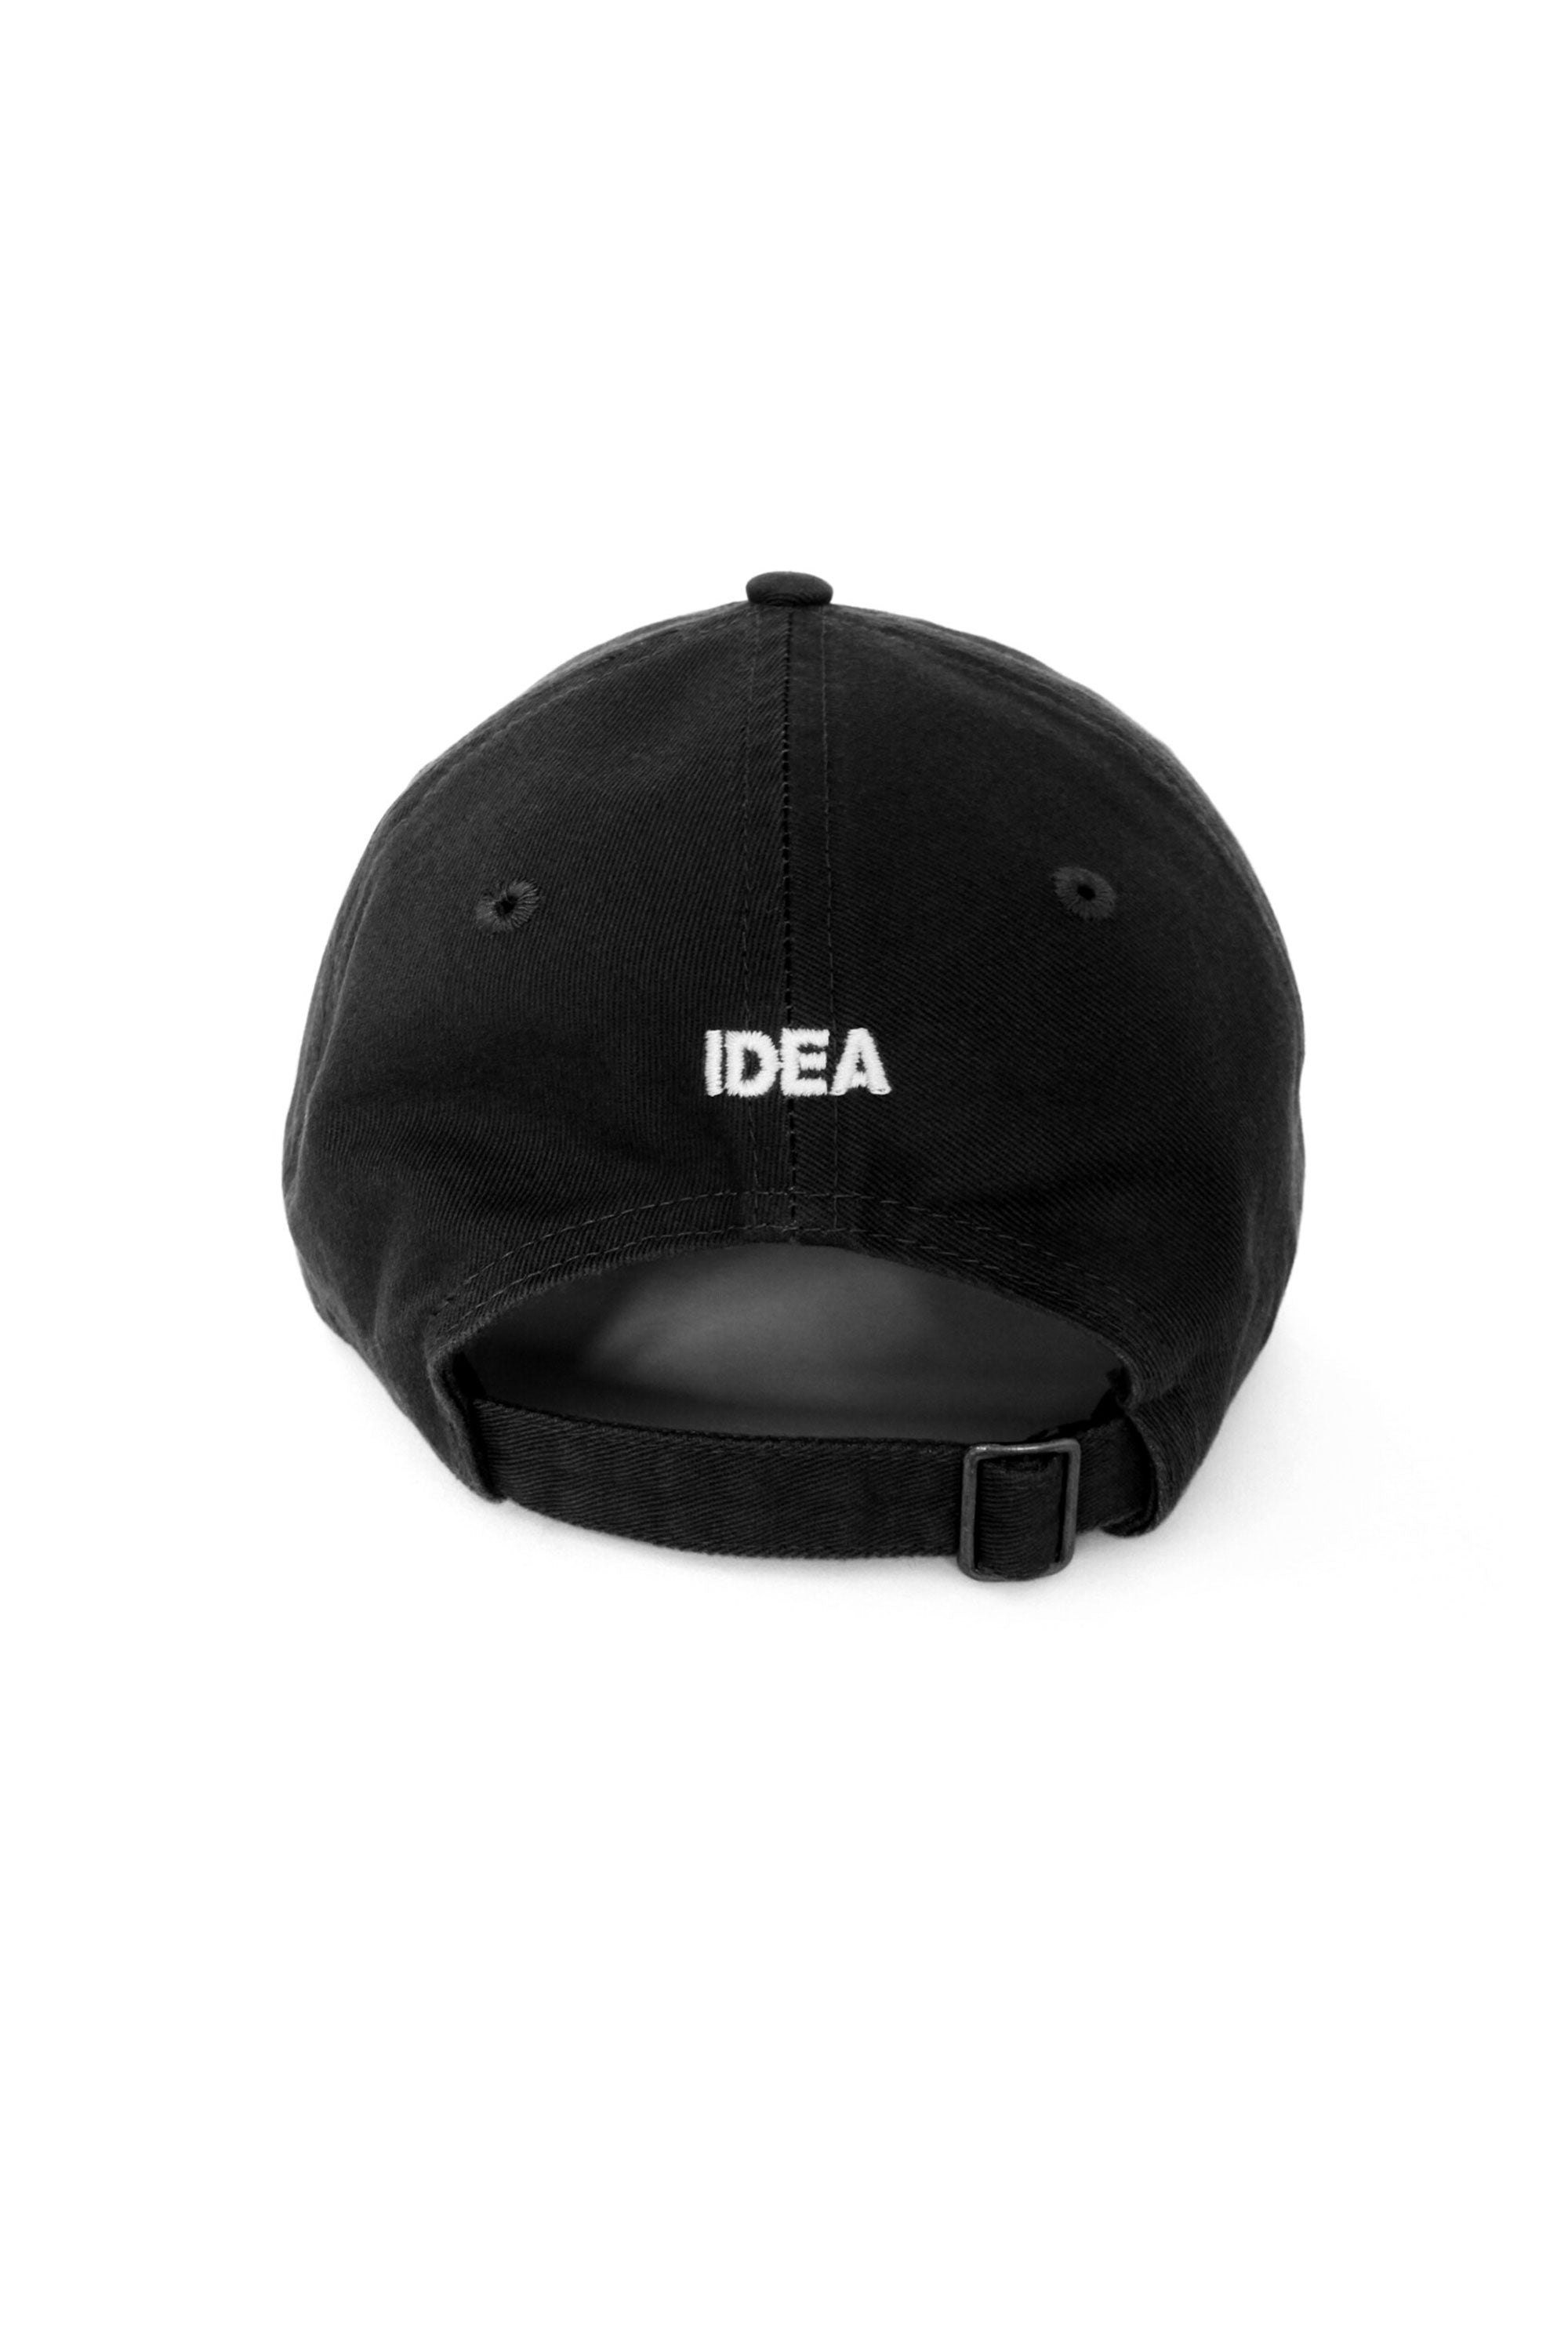 The IDEA - ONE NIGHT ONLY HAT BLACK  available online with global shipping, and in PAM Stores Melbourne and Sydney.